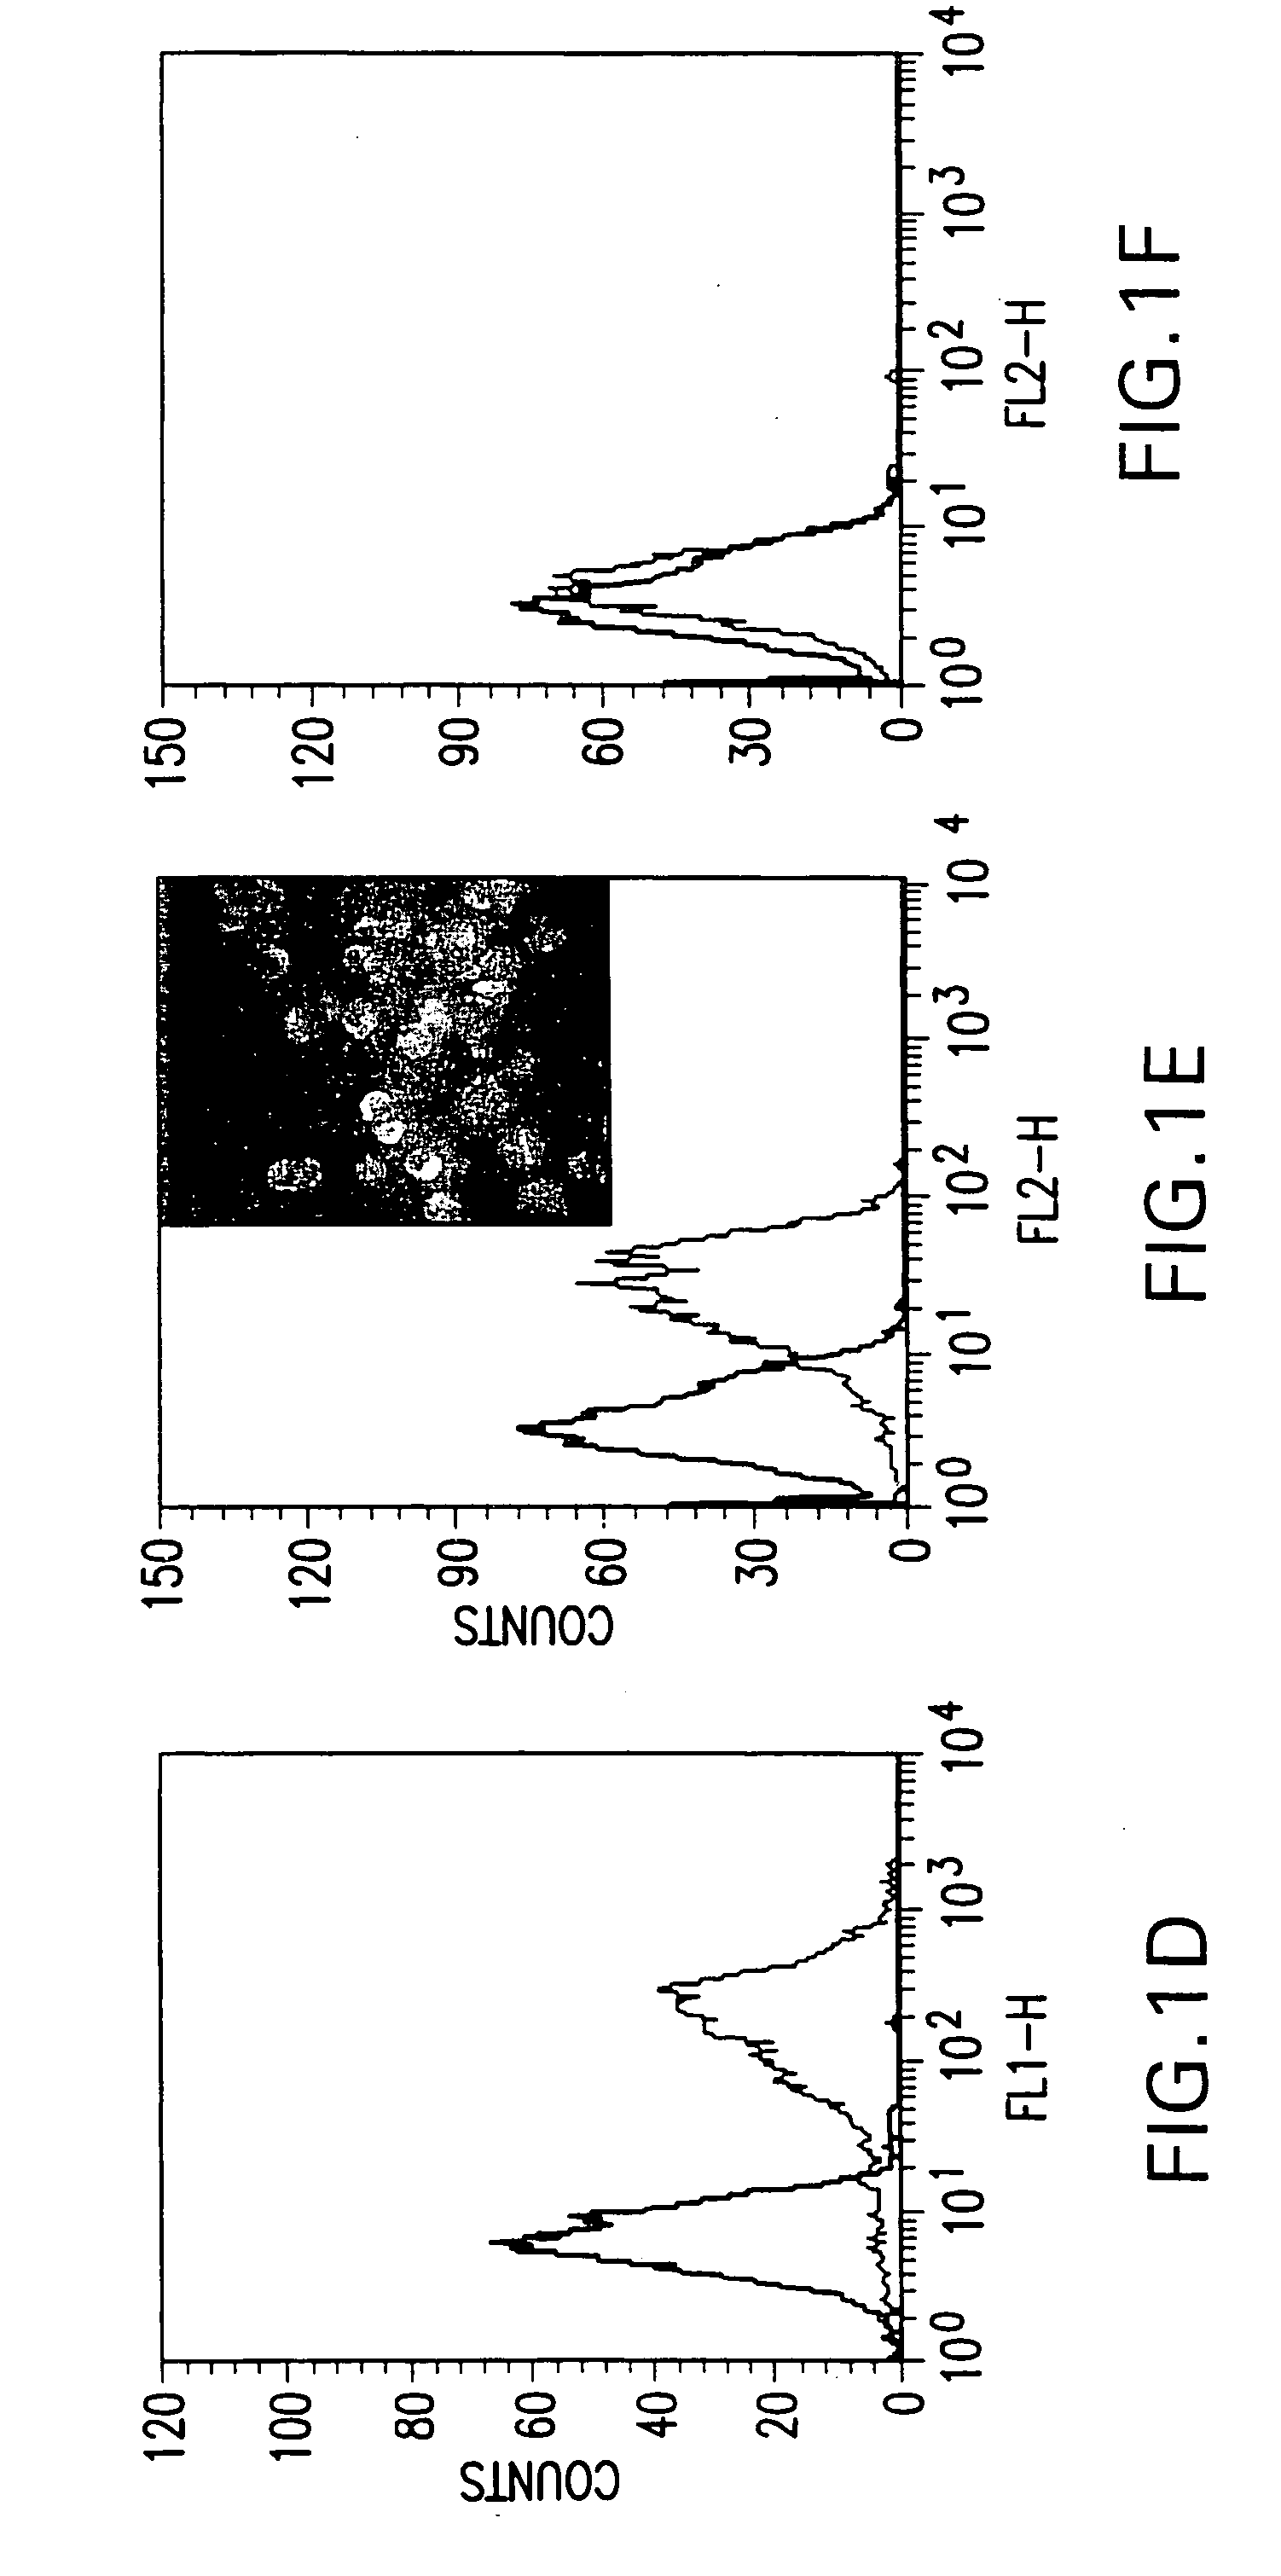 Tumor-targeted drug delivery systems and uses thereof